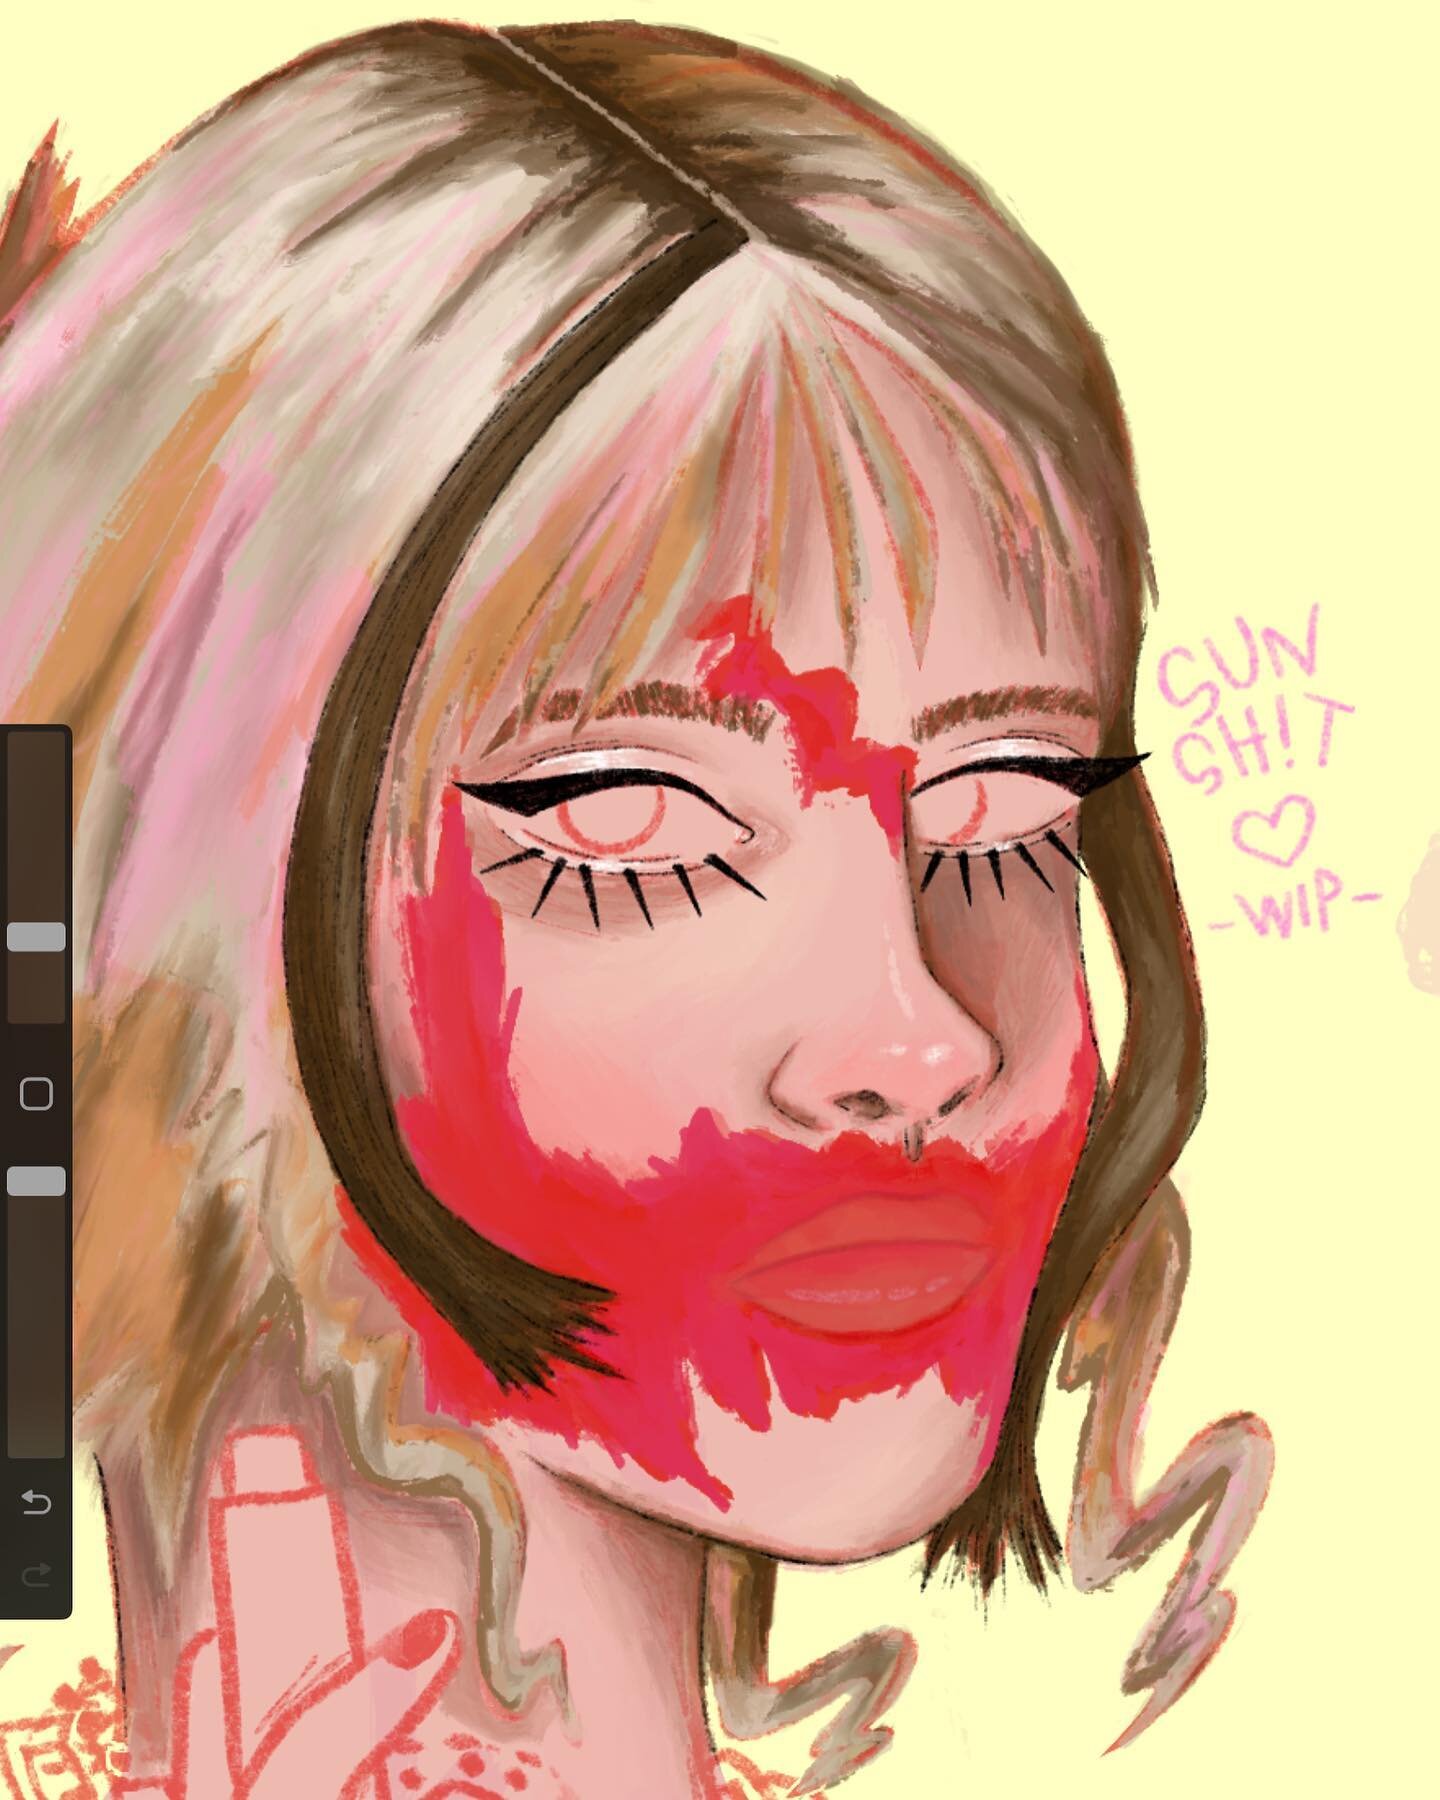 lil wip post 🖤 sorry for the inactivity, art block + comms been kicking my ass this month &lt;/3 luv u all